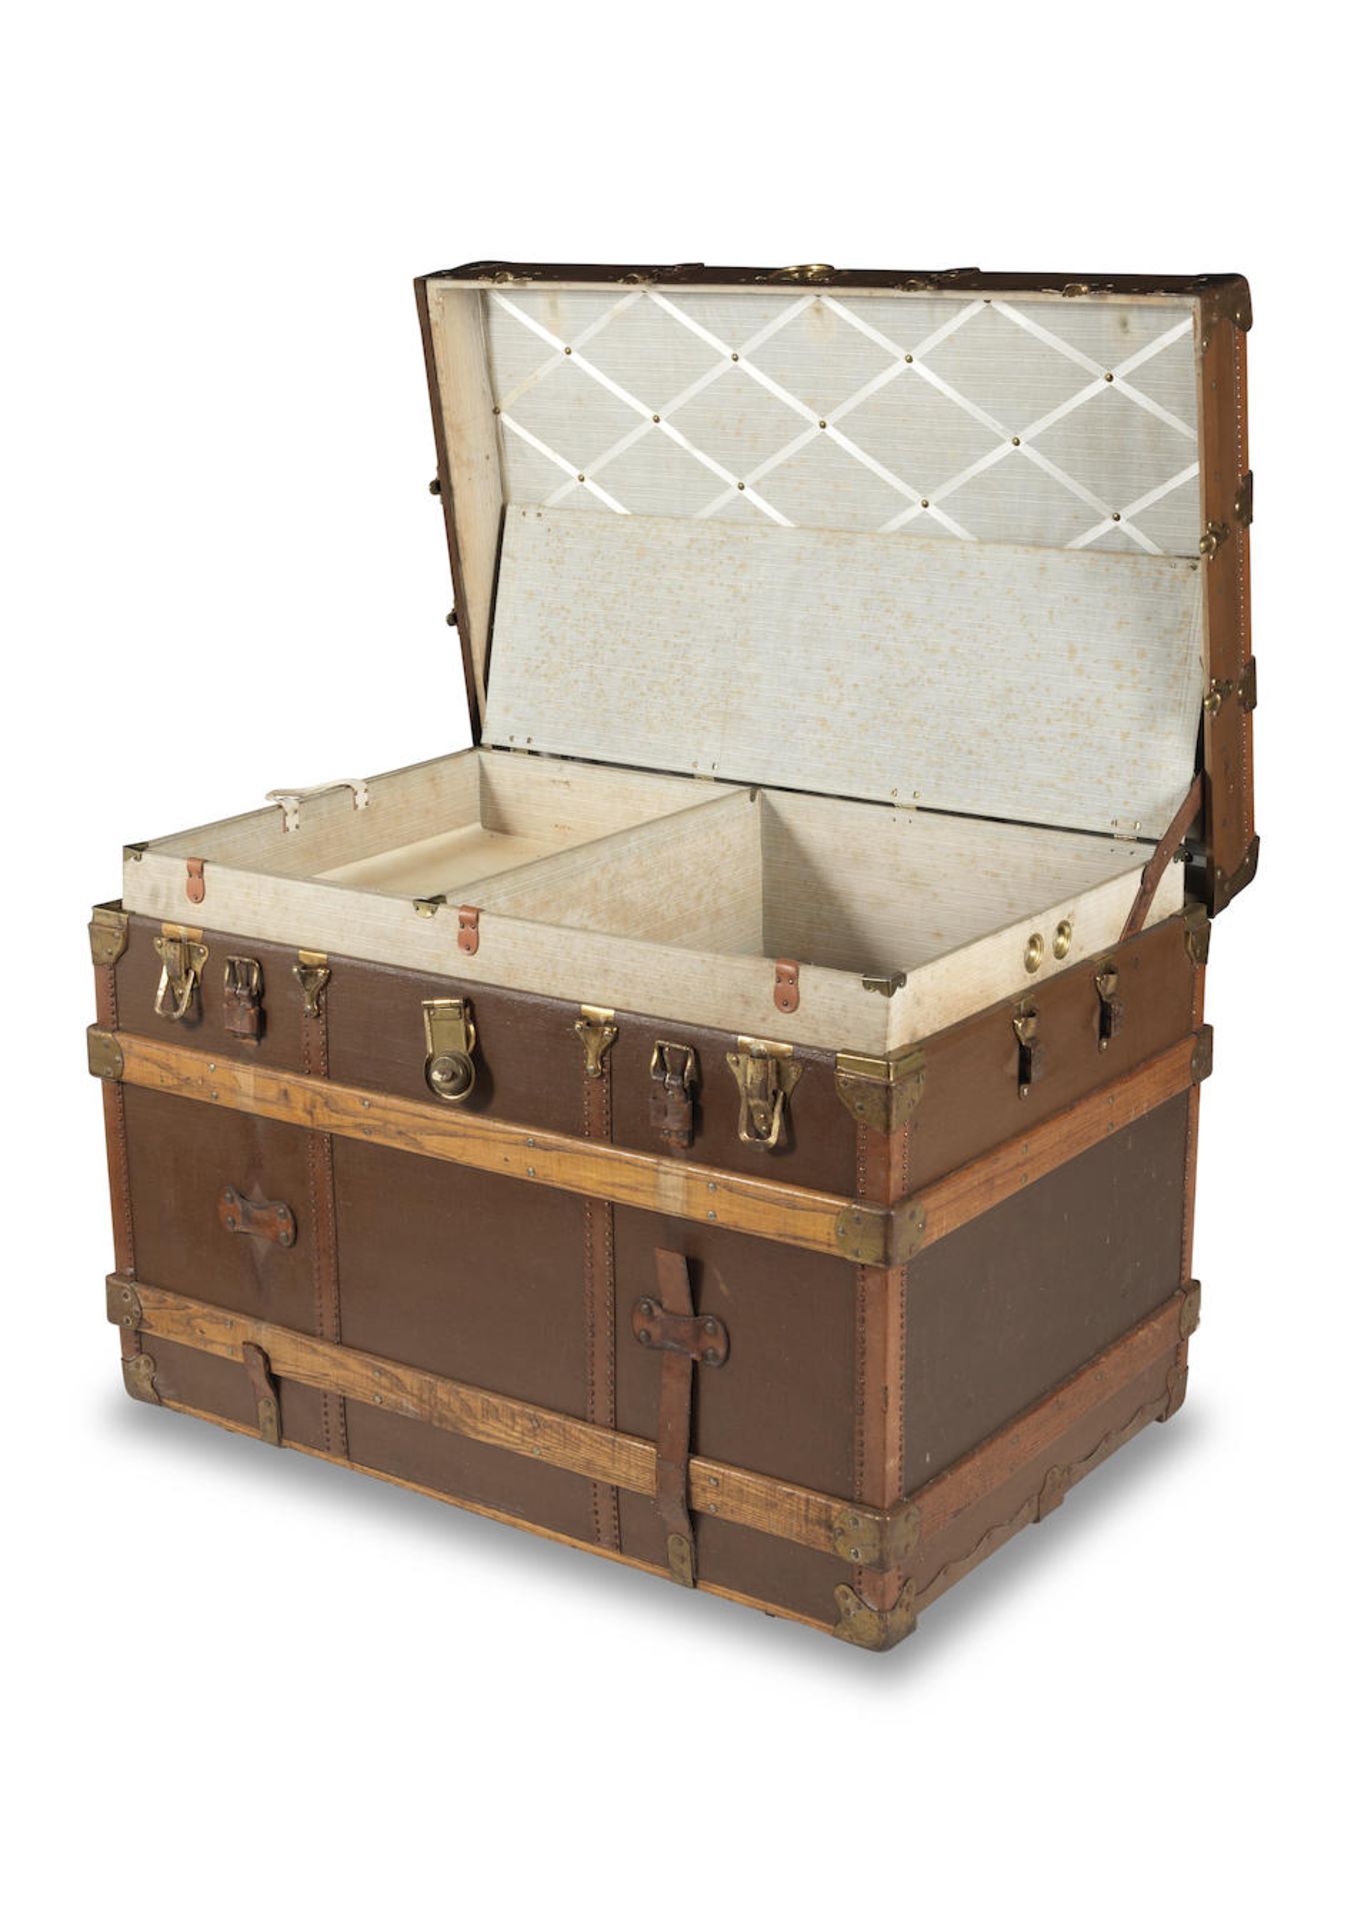 An early 20th century American steamer trunk made by Henry Likly & Co, Rochester (New York) - Image 2 of 3